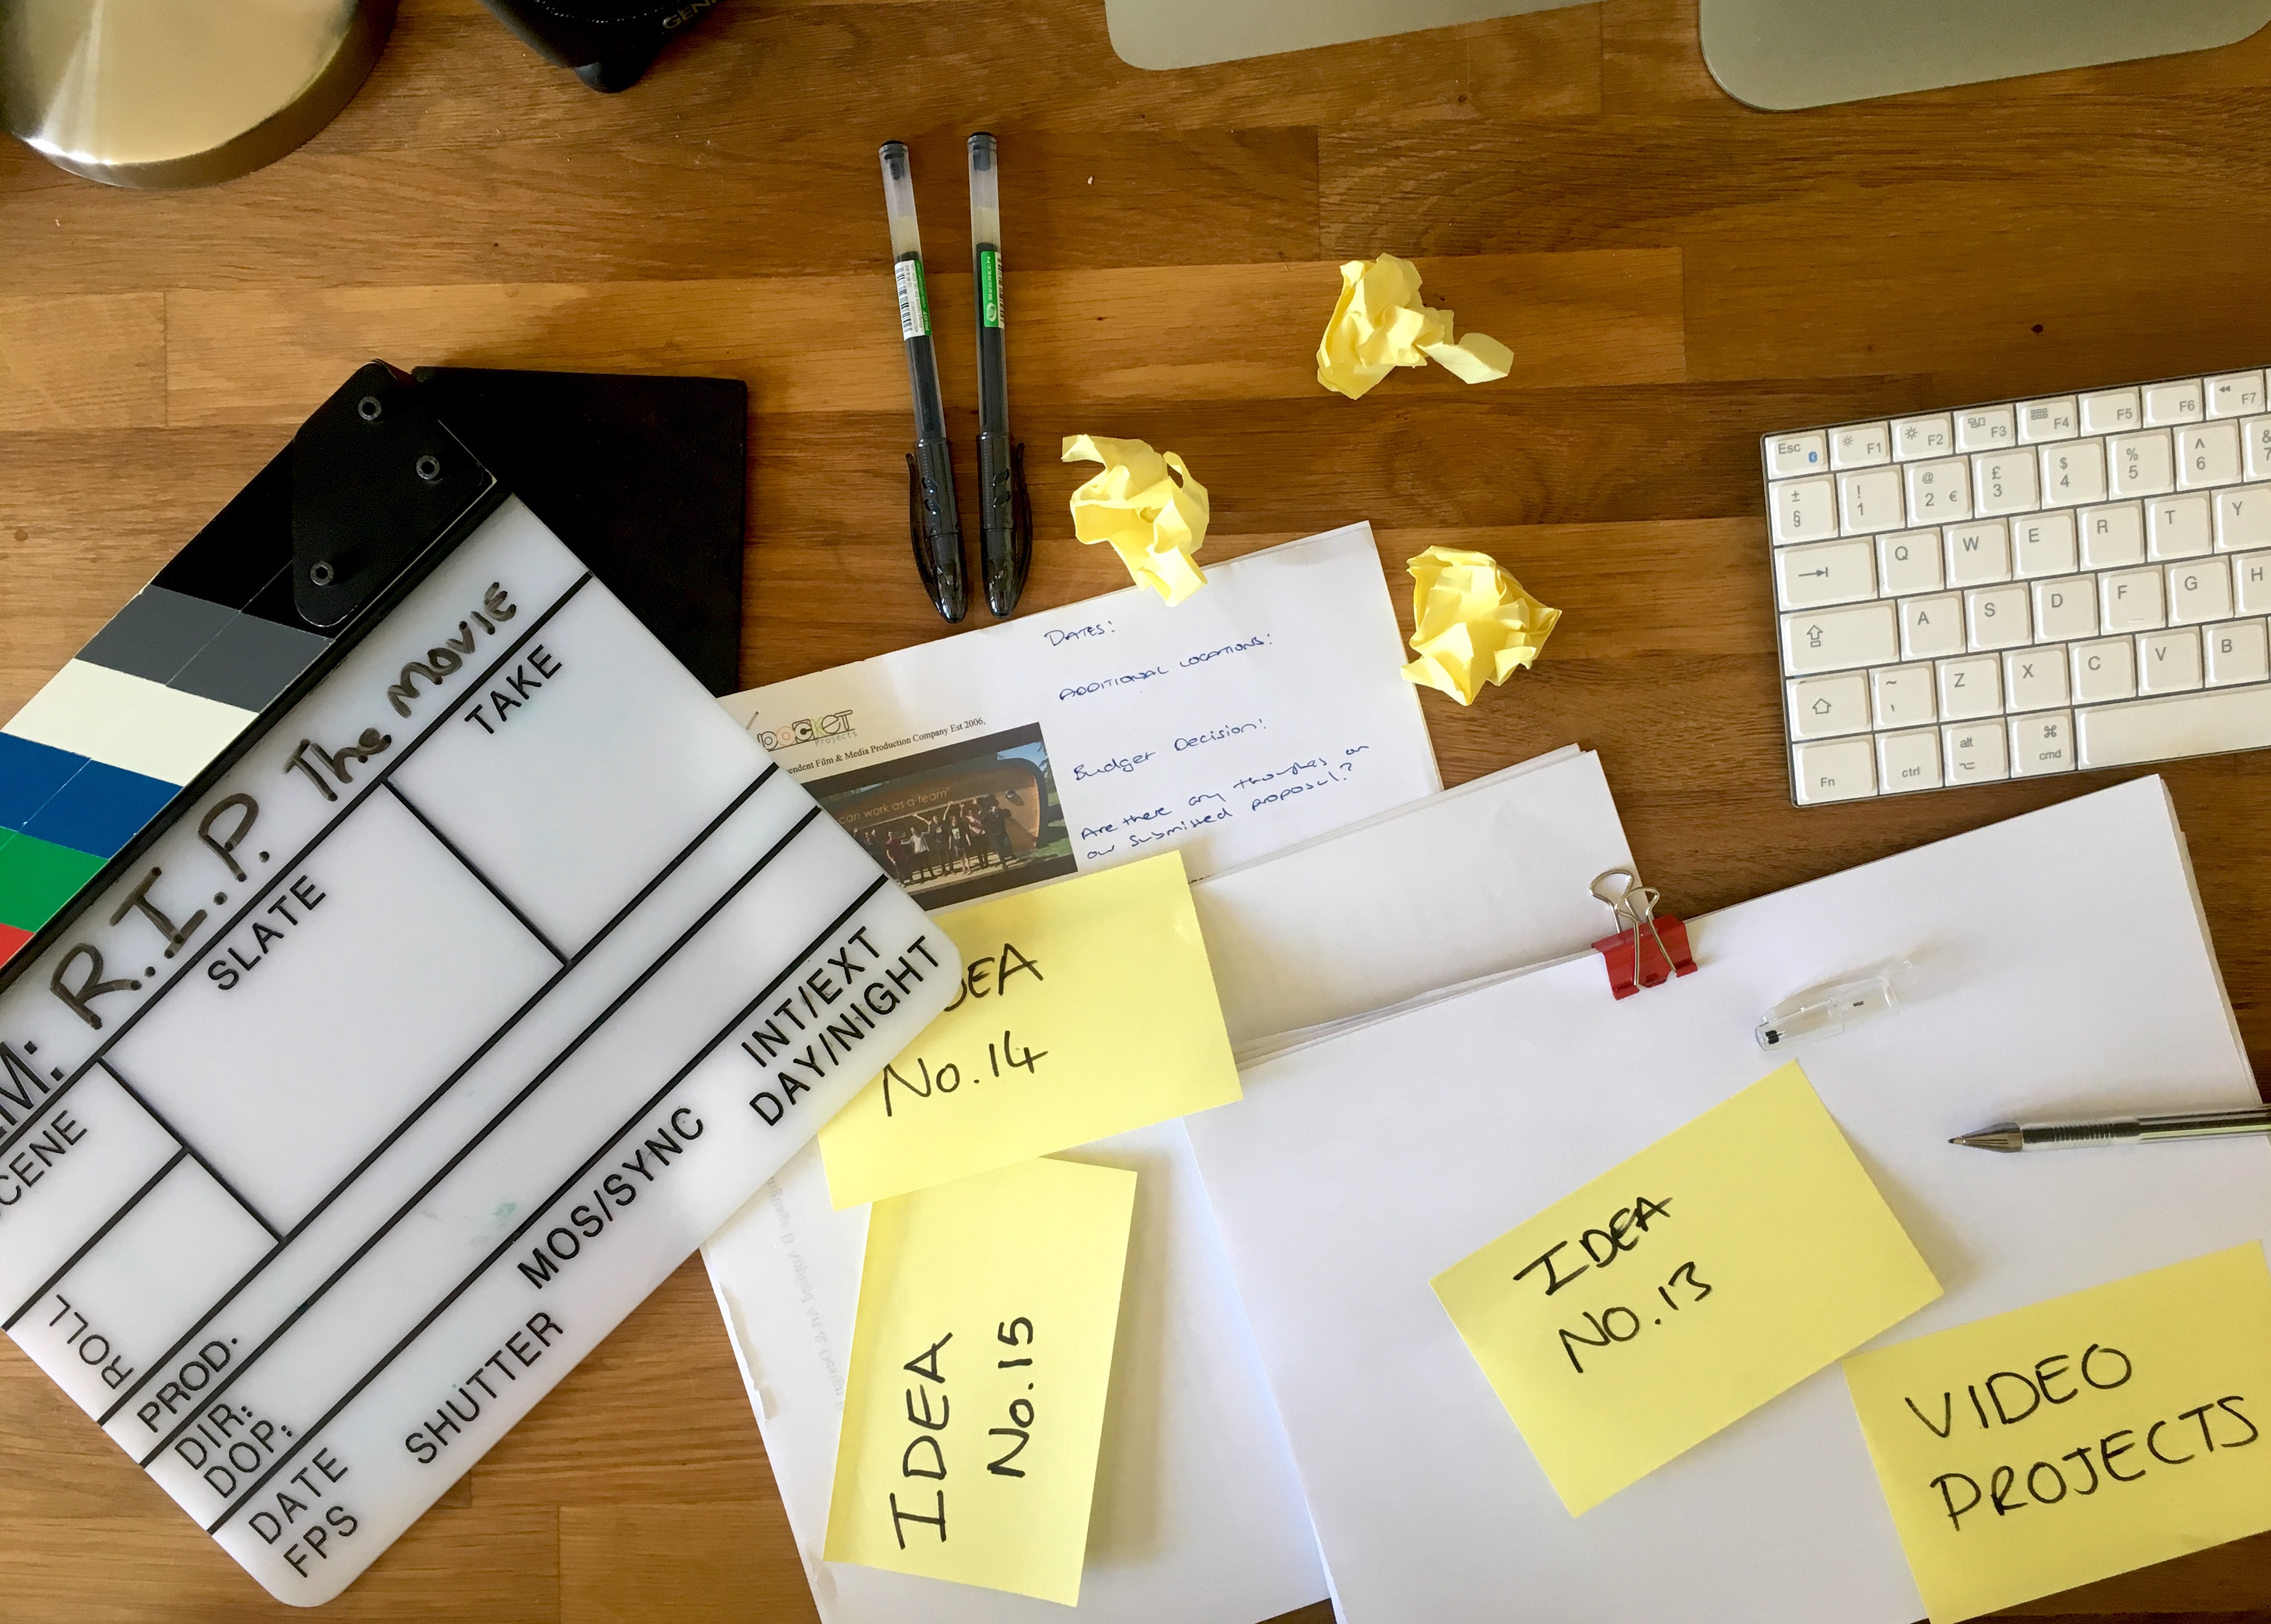 5 ways to kill your video projects